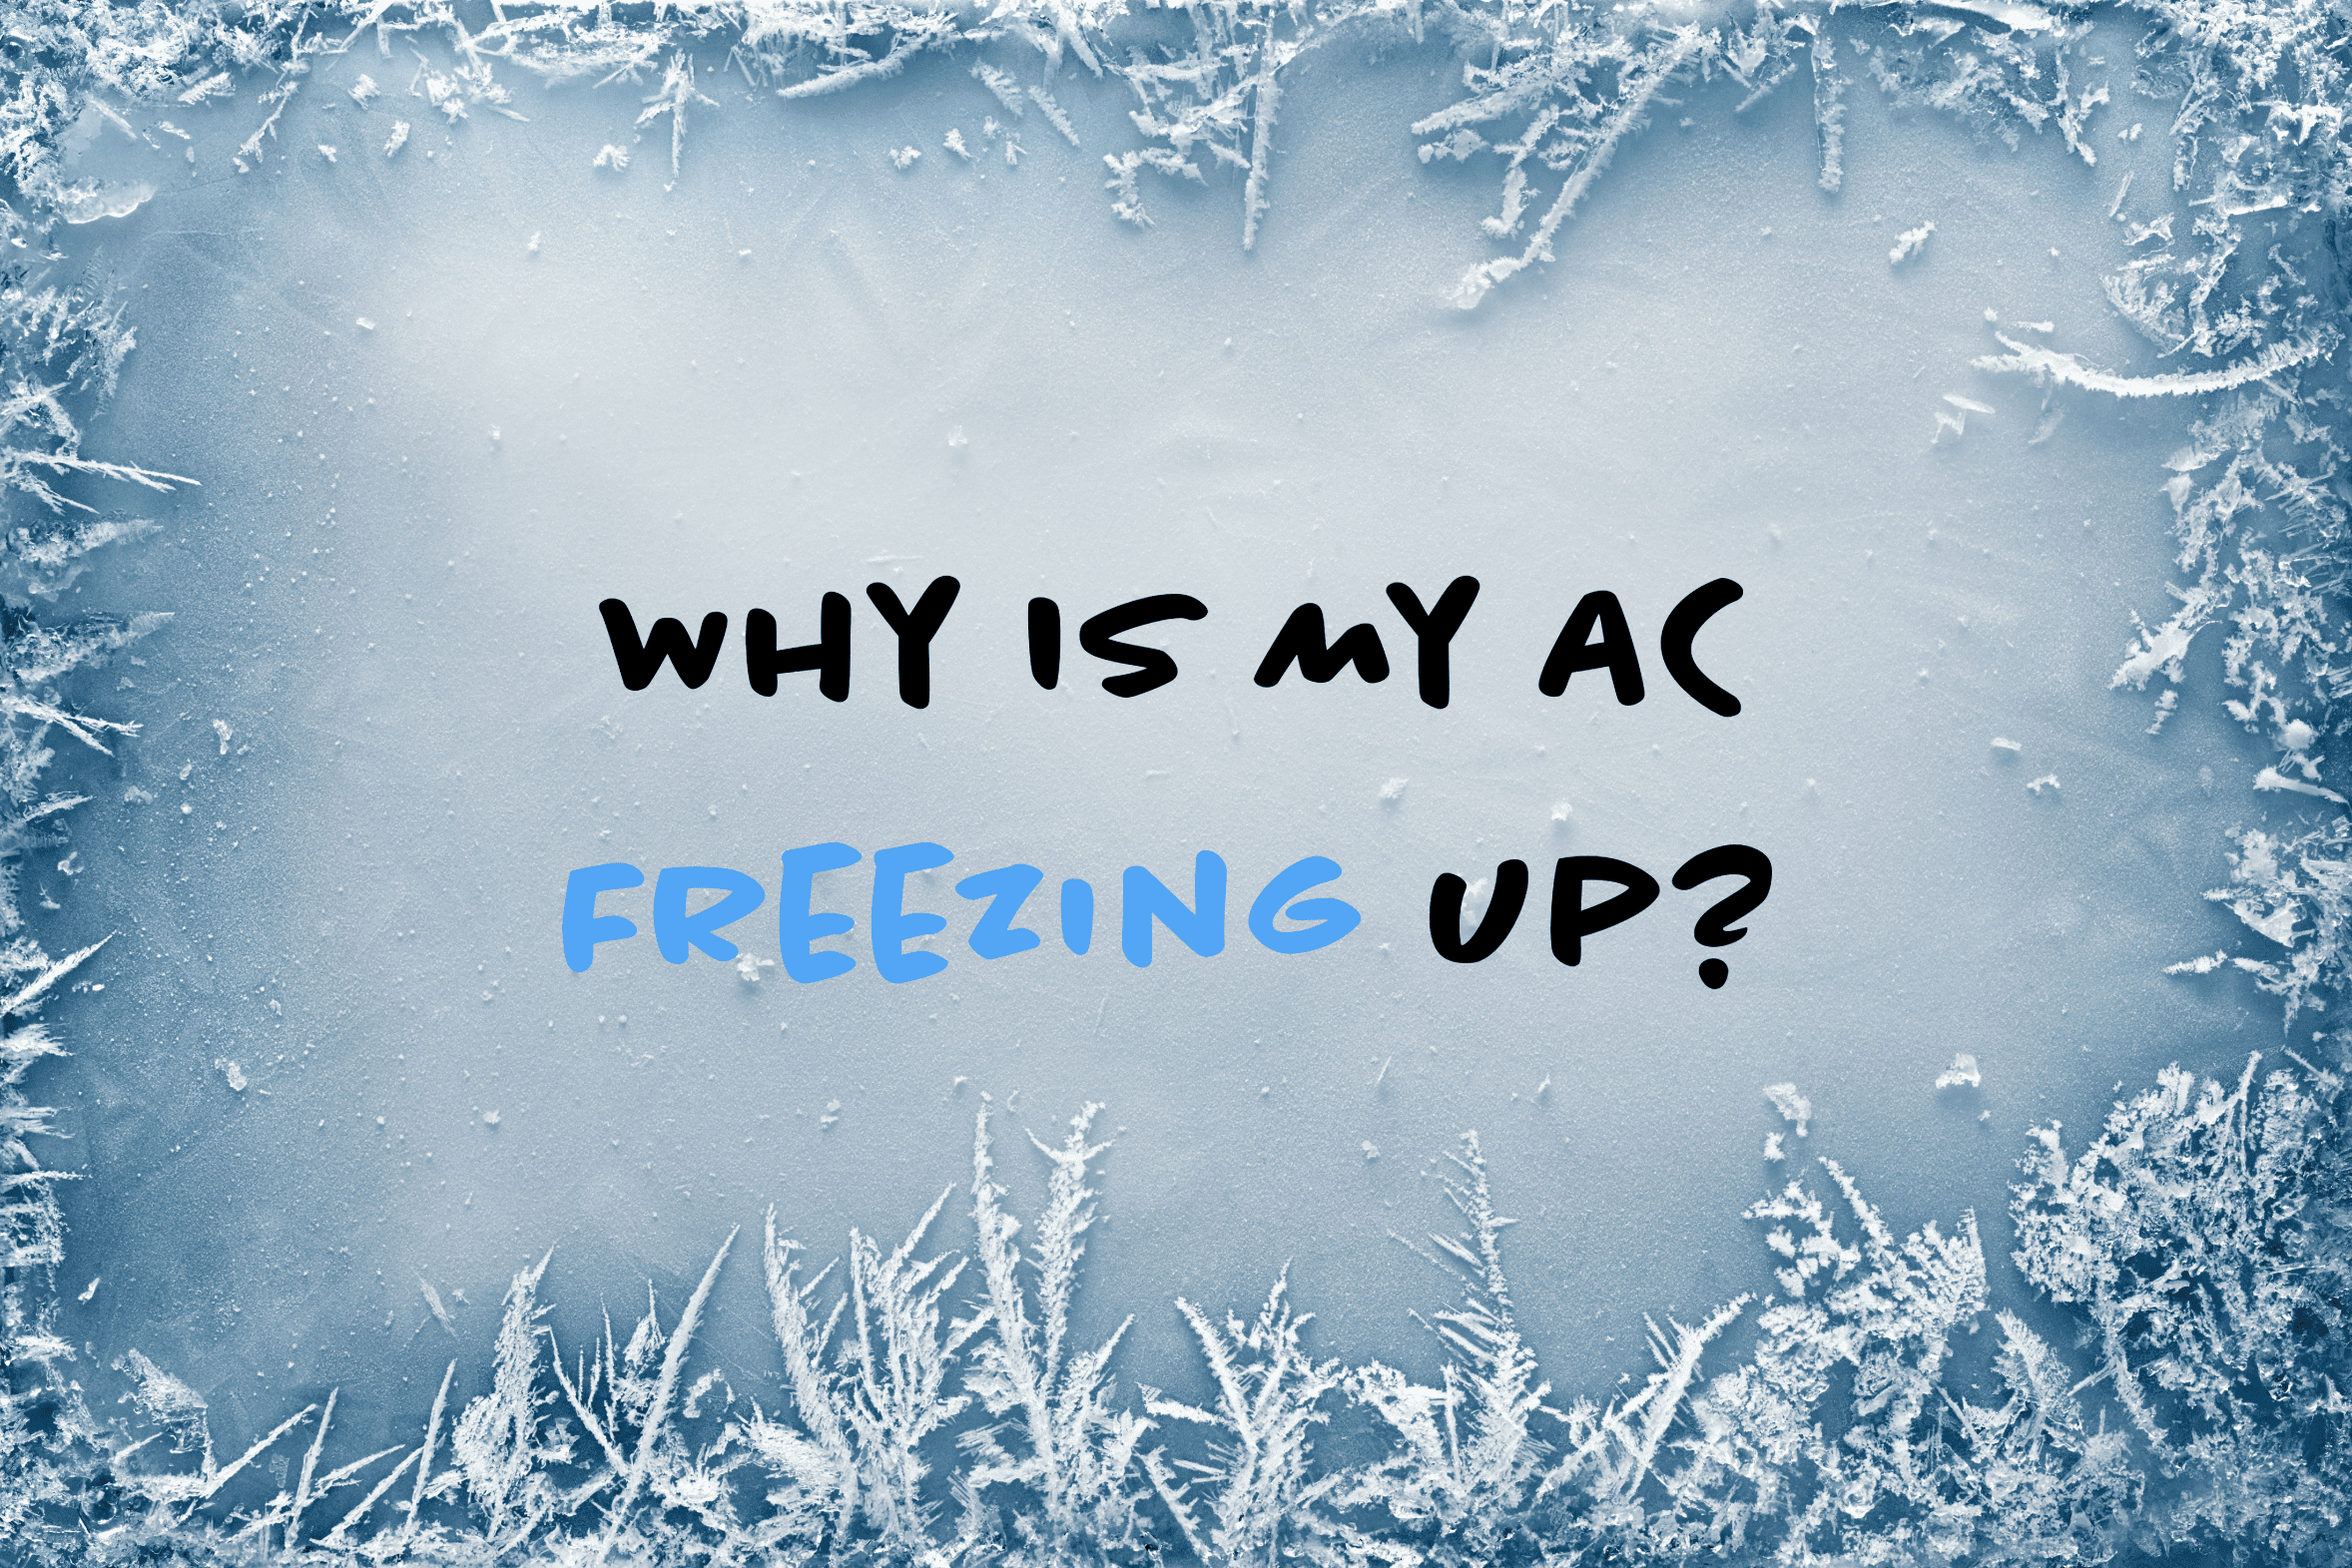 Blog on how to troubleshoot and AC that is freezing up.